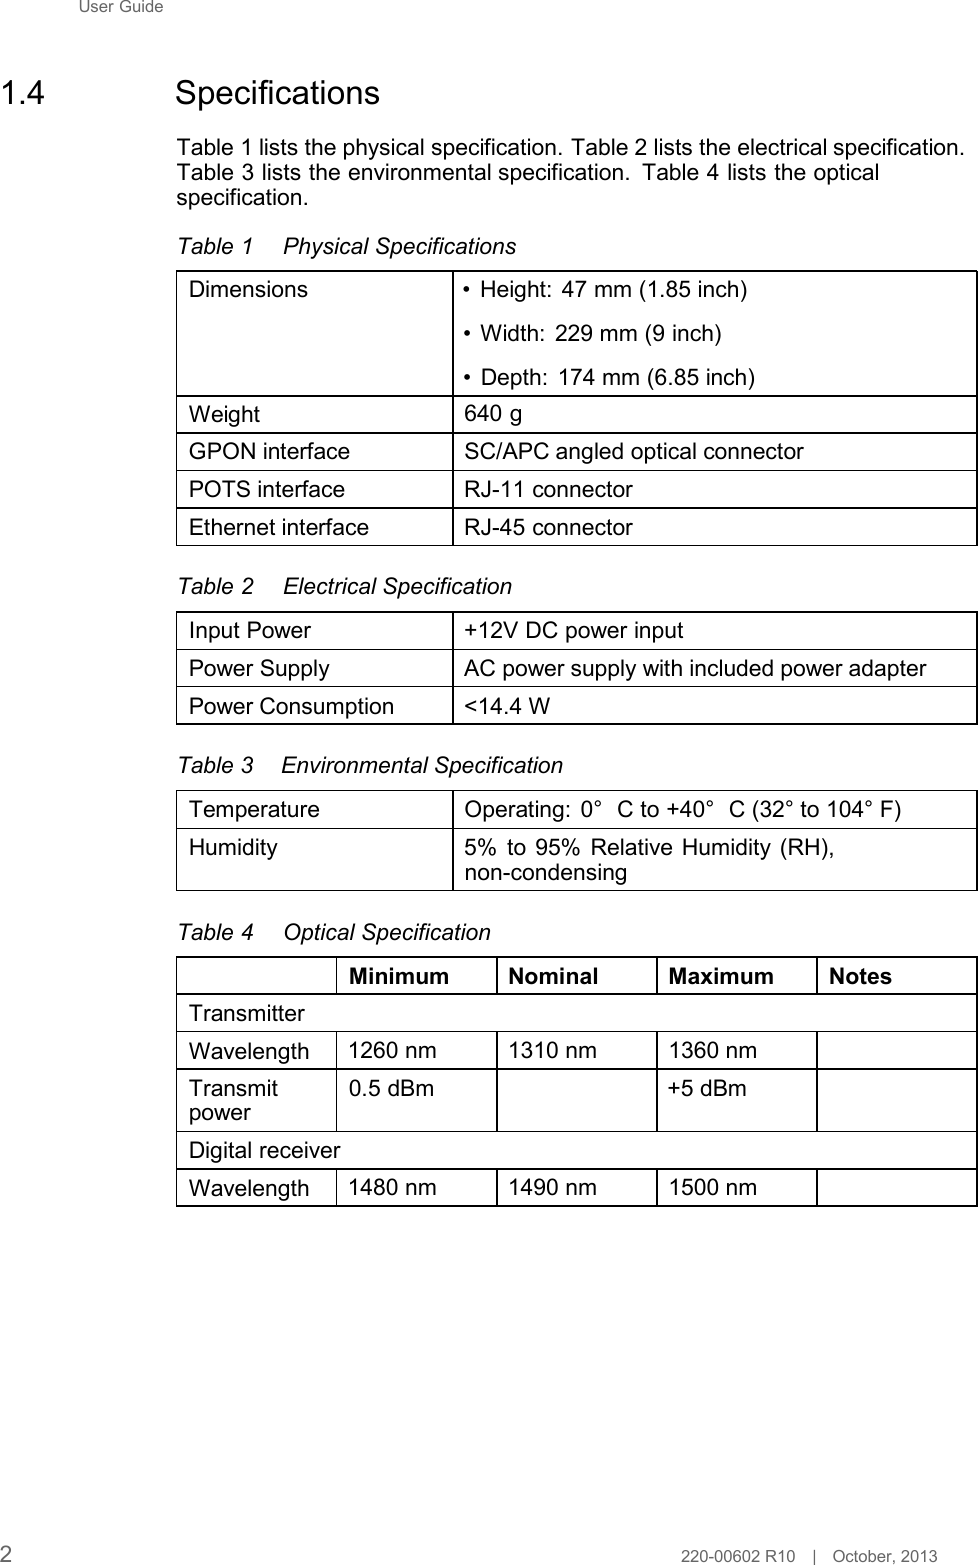 User Guide    1.4  Specifications  Table 1 lists the physical specification. Table 2 lists the electrical specification. Table 3 lists the environmental specification. Table 4 lists the optical specification.  Table 1  Physical Specifications  Dimensions • Height: 47 mm (1.85 inch)  • Width: 229 mm (9 inch)  • Depth: 174 mm (6.85 inch) Weight 640 g GPON interface SC/APC angled optical connector  POTS interface RJ-11 connector  Ethernet interface RJ-45 connector  Table 2  Electrical Specification  Input Power +12V DC power input  Power Supply AC power supply with included power adapter  Power Consumption &lt;14.4 W  Table 3  Environmental Specification  Temperature Operating:  0°         C to +40°         C (32° to 104° F)  Humidity 5% to 95% Relative Humidity (RH), non-condensing  Table 4  Optical Specification  Minimum Nominal Maximum Notes  Transmitter  Wavelength 1260 nm 1310 nm 1360 nm  Transmit power  Digital receiver  0.5 dBm +5 dBm  Wavelength 1480 nm 1490 nm 1500 nm                 2  220-00602 R10   |   October, 2013 